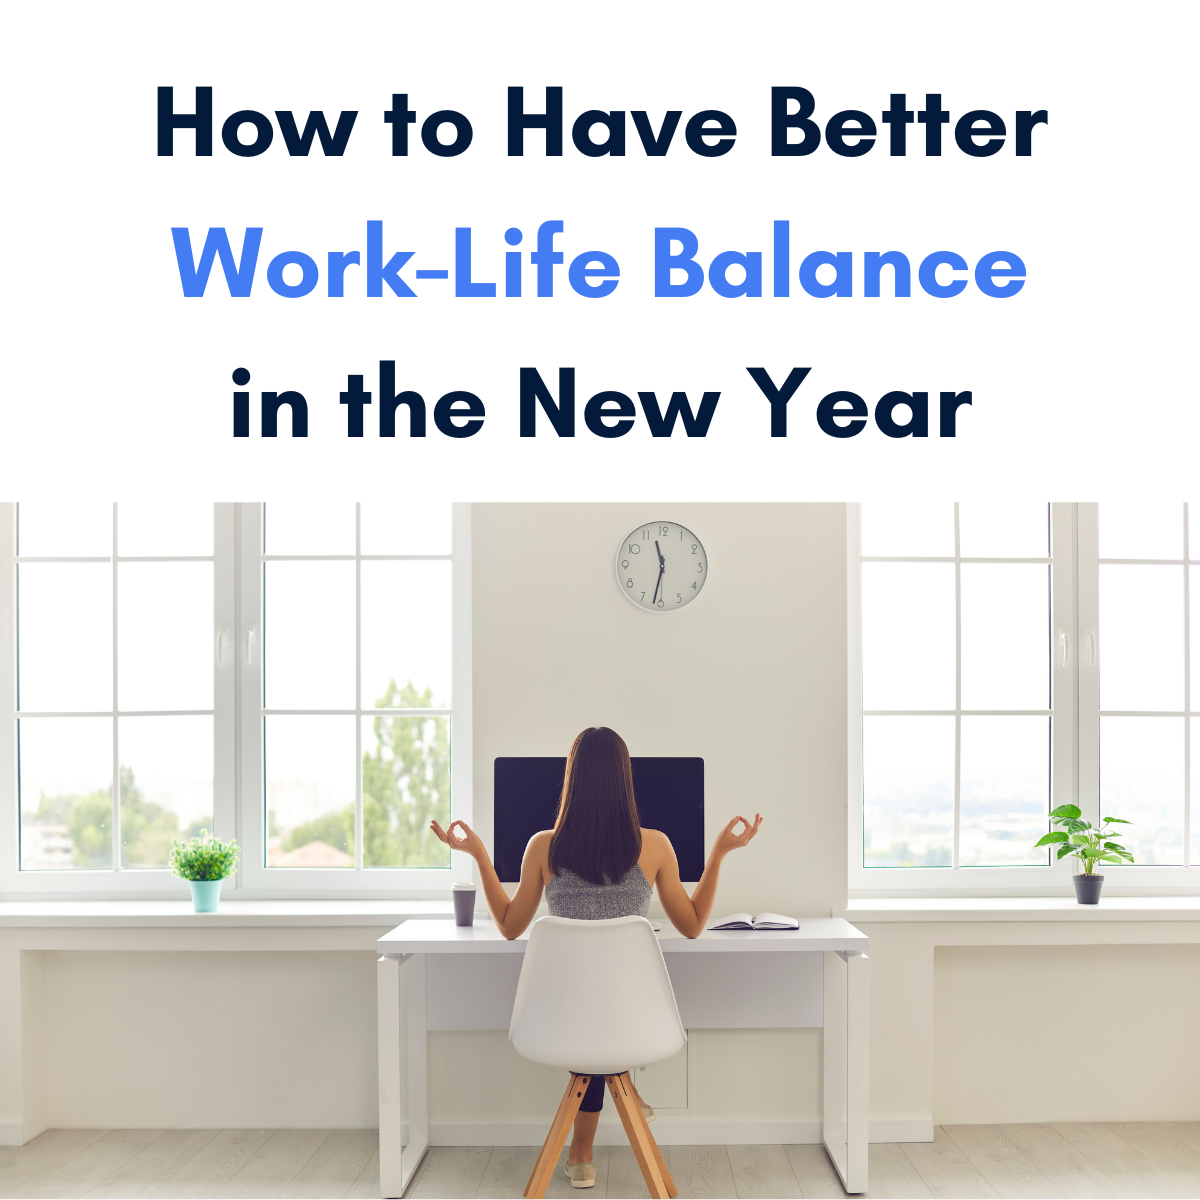 How to have better work-life balance in the New Year